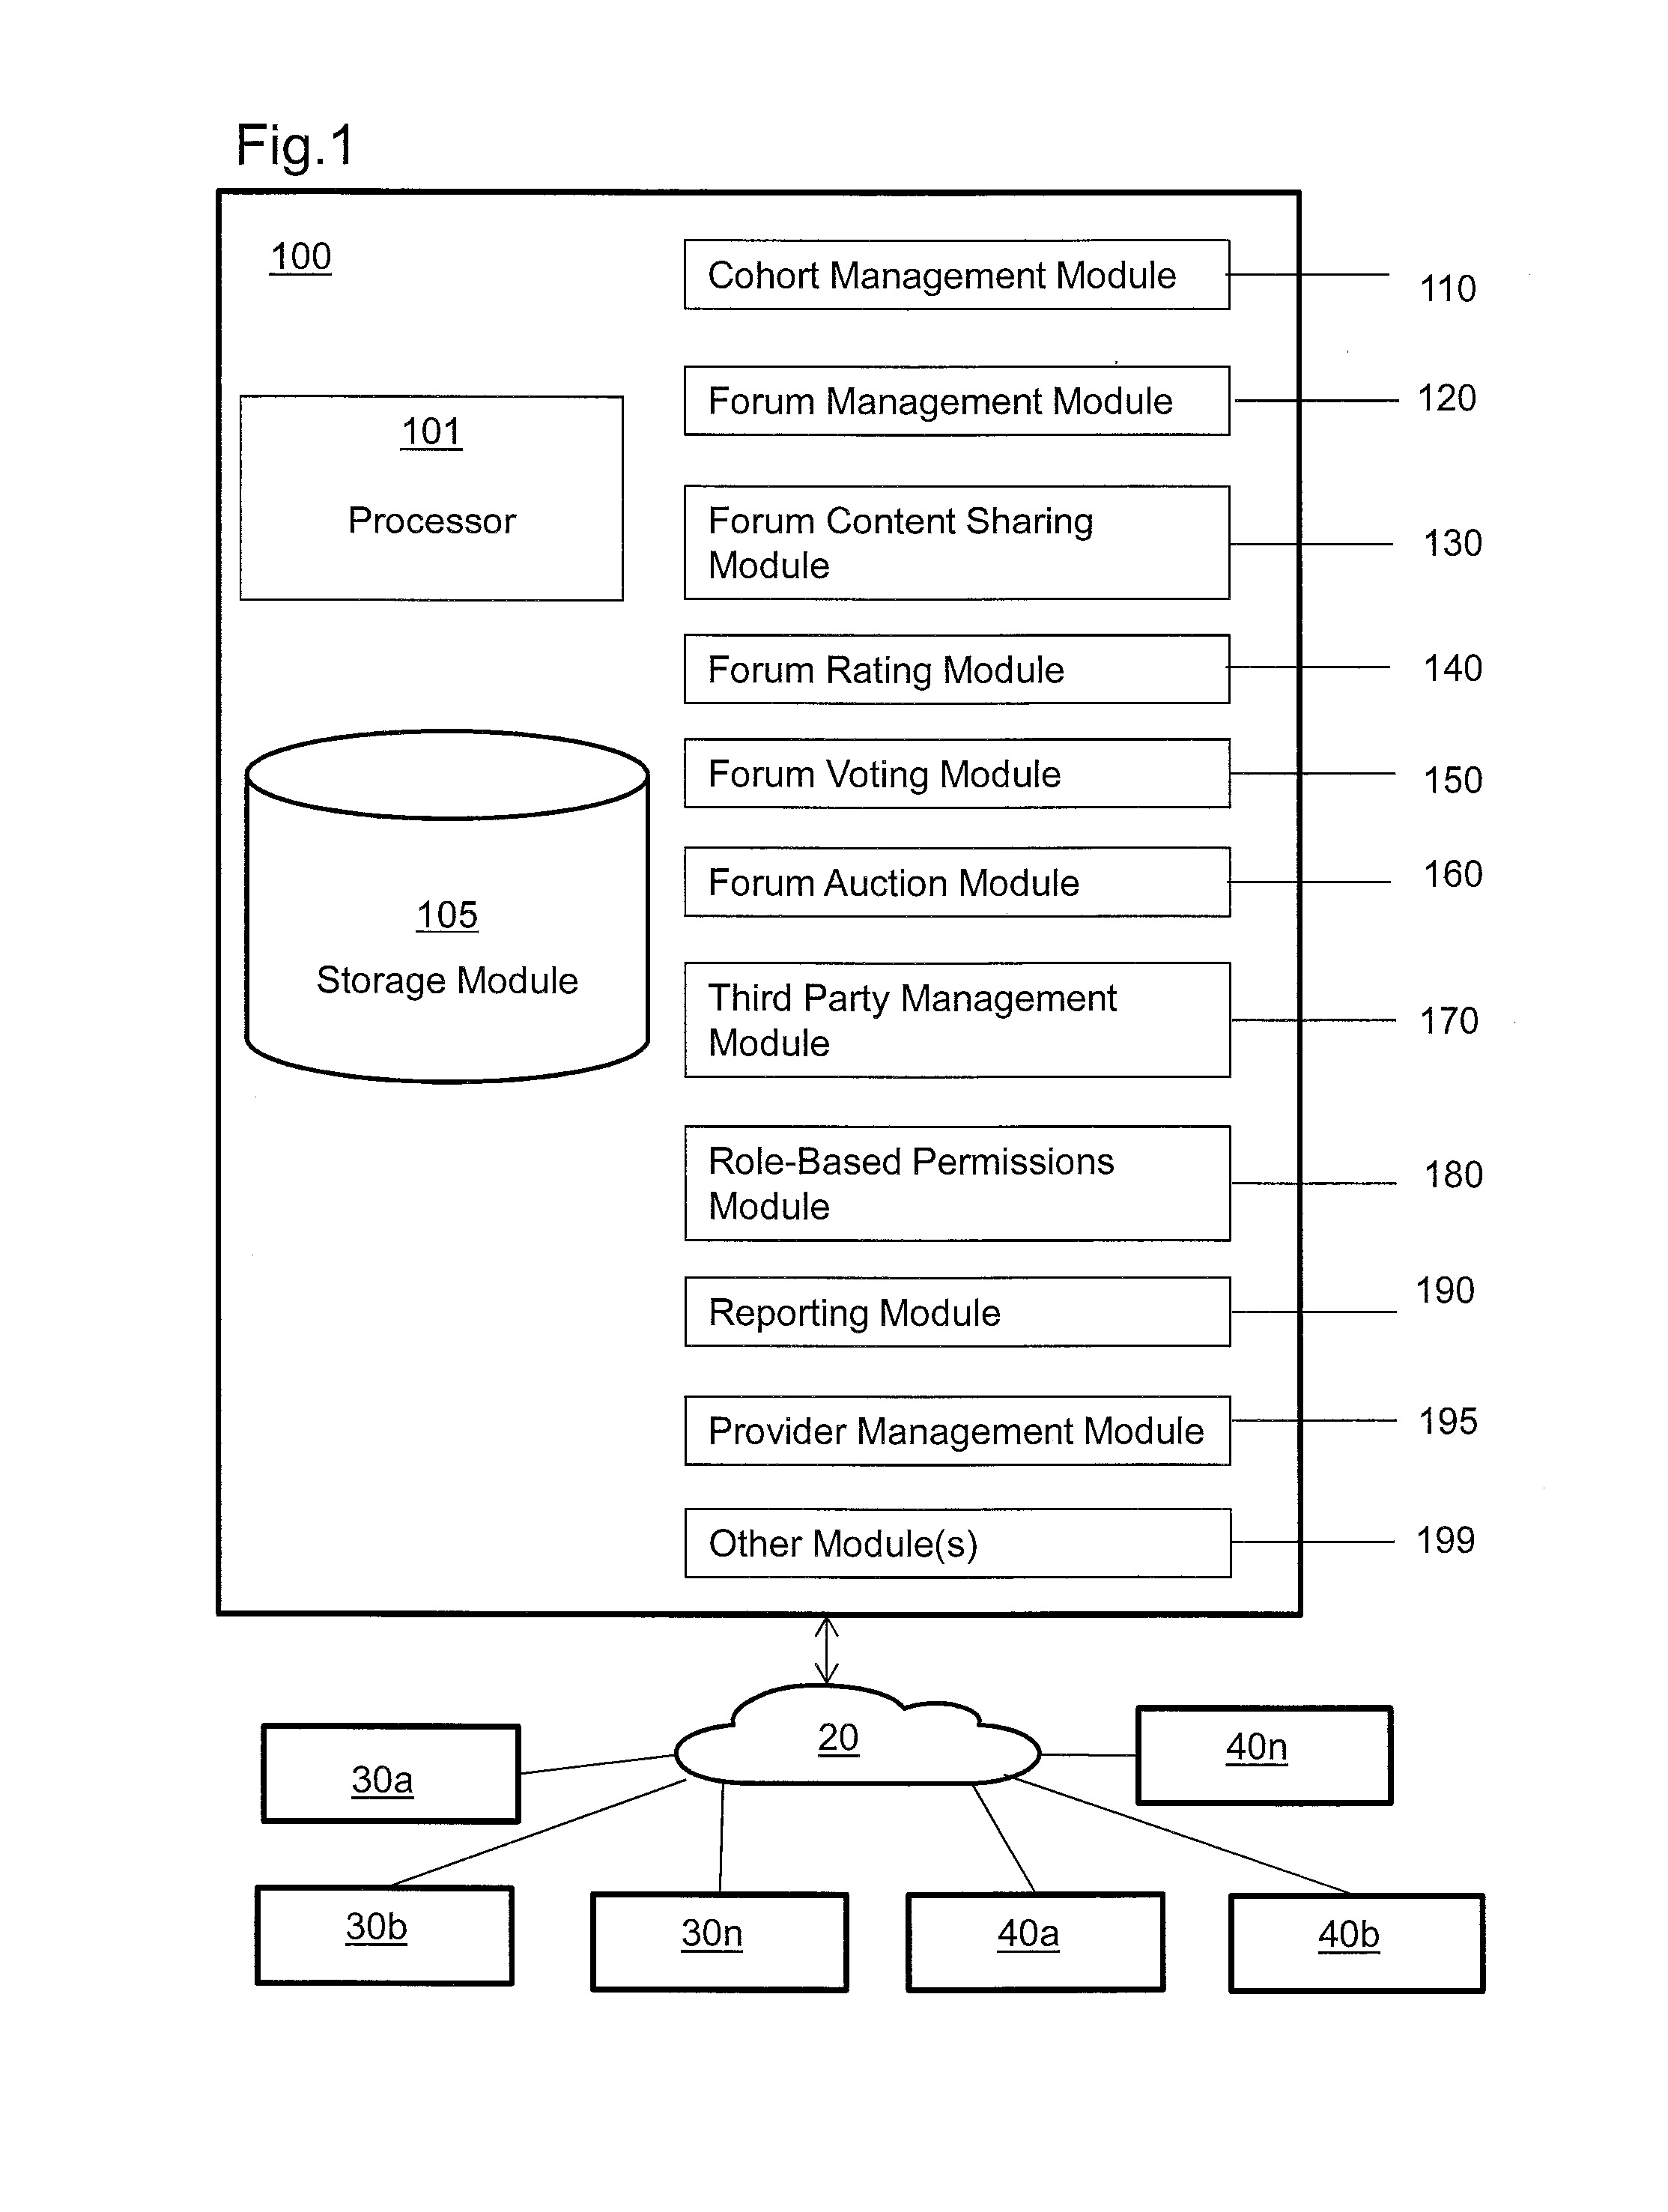 System and method for creating an ad hoc social networking forum for a cohort of users